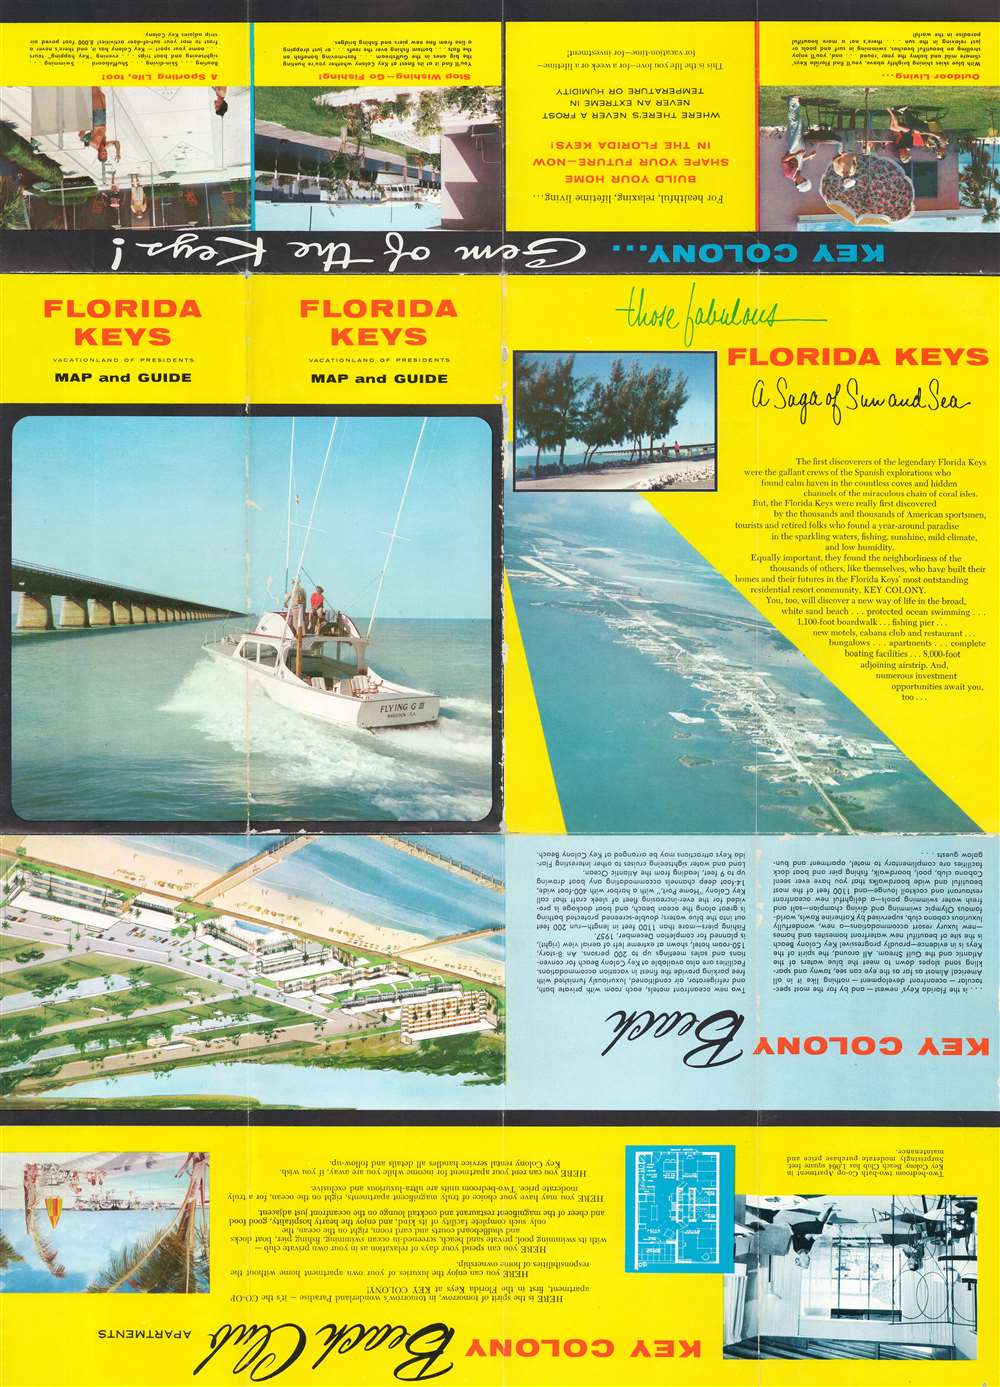 Florida Keys Map and Guide. Vacationland of Presidents. - Alternate View 1